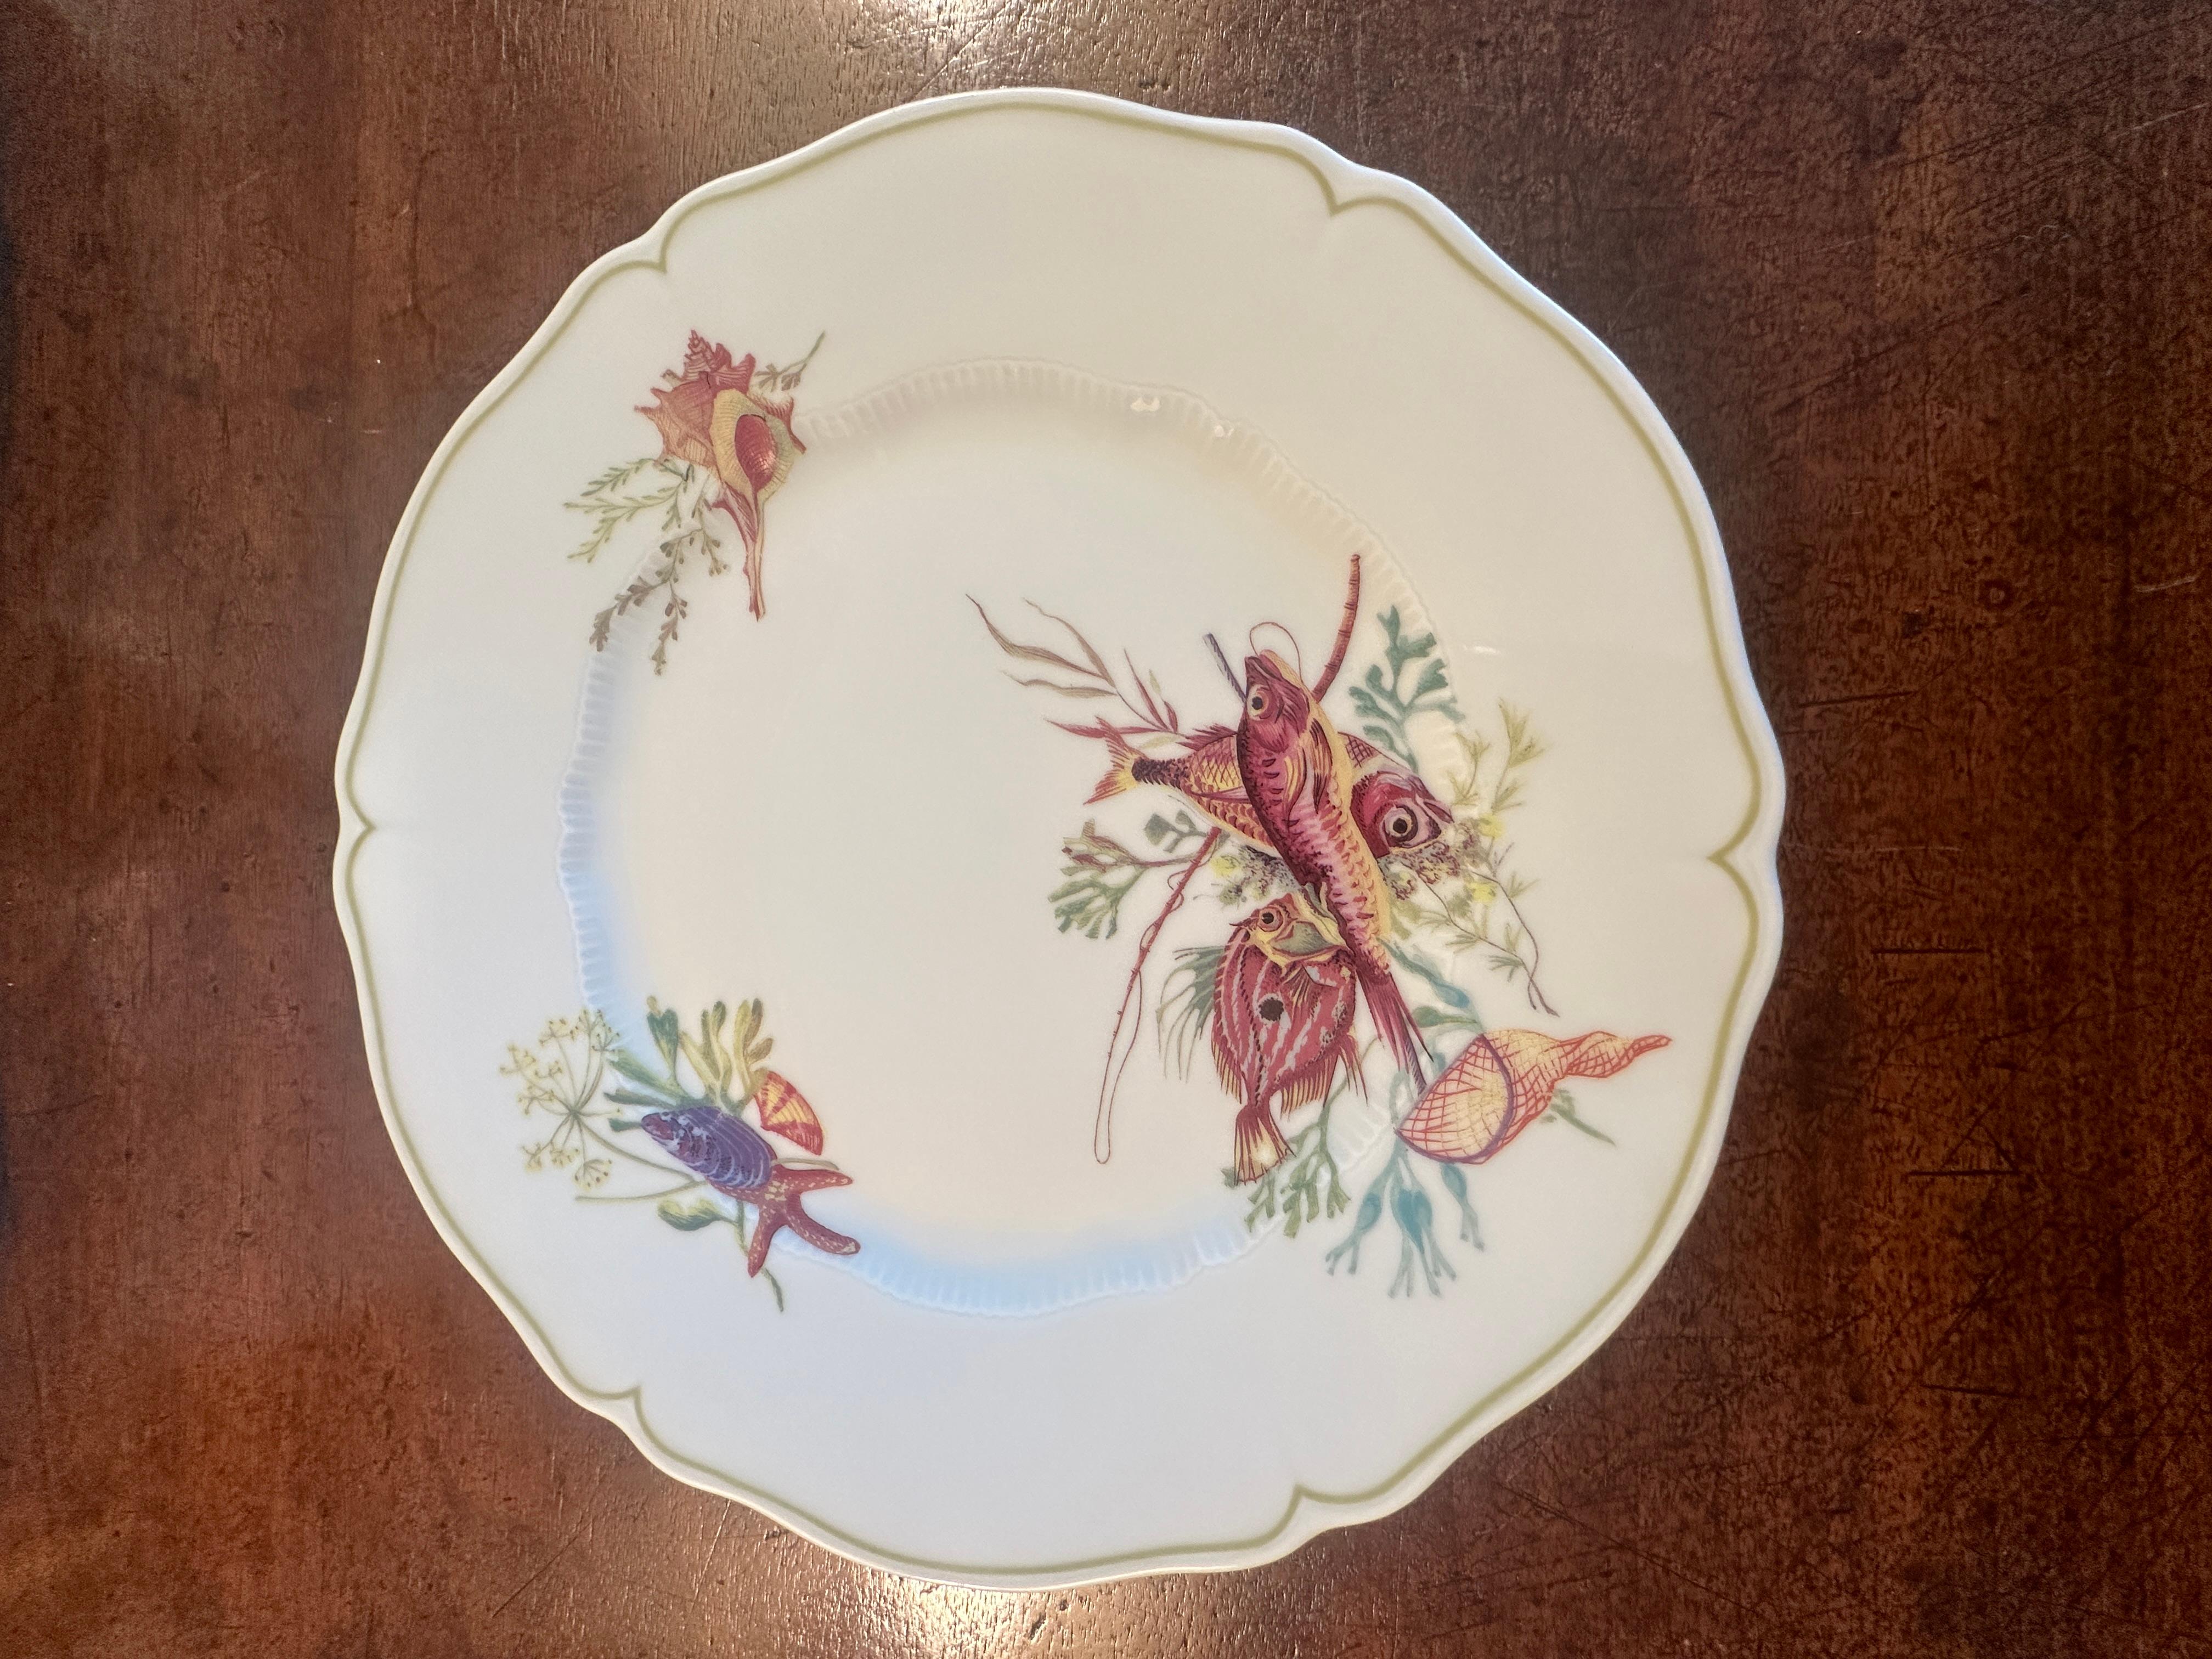 Set of 12 Havilland- Limoges Dinner Plates, Six Fish and Crustacean Designs In Good Condition For Sale In San Francisco, CA